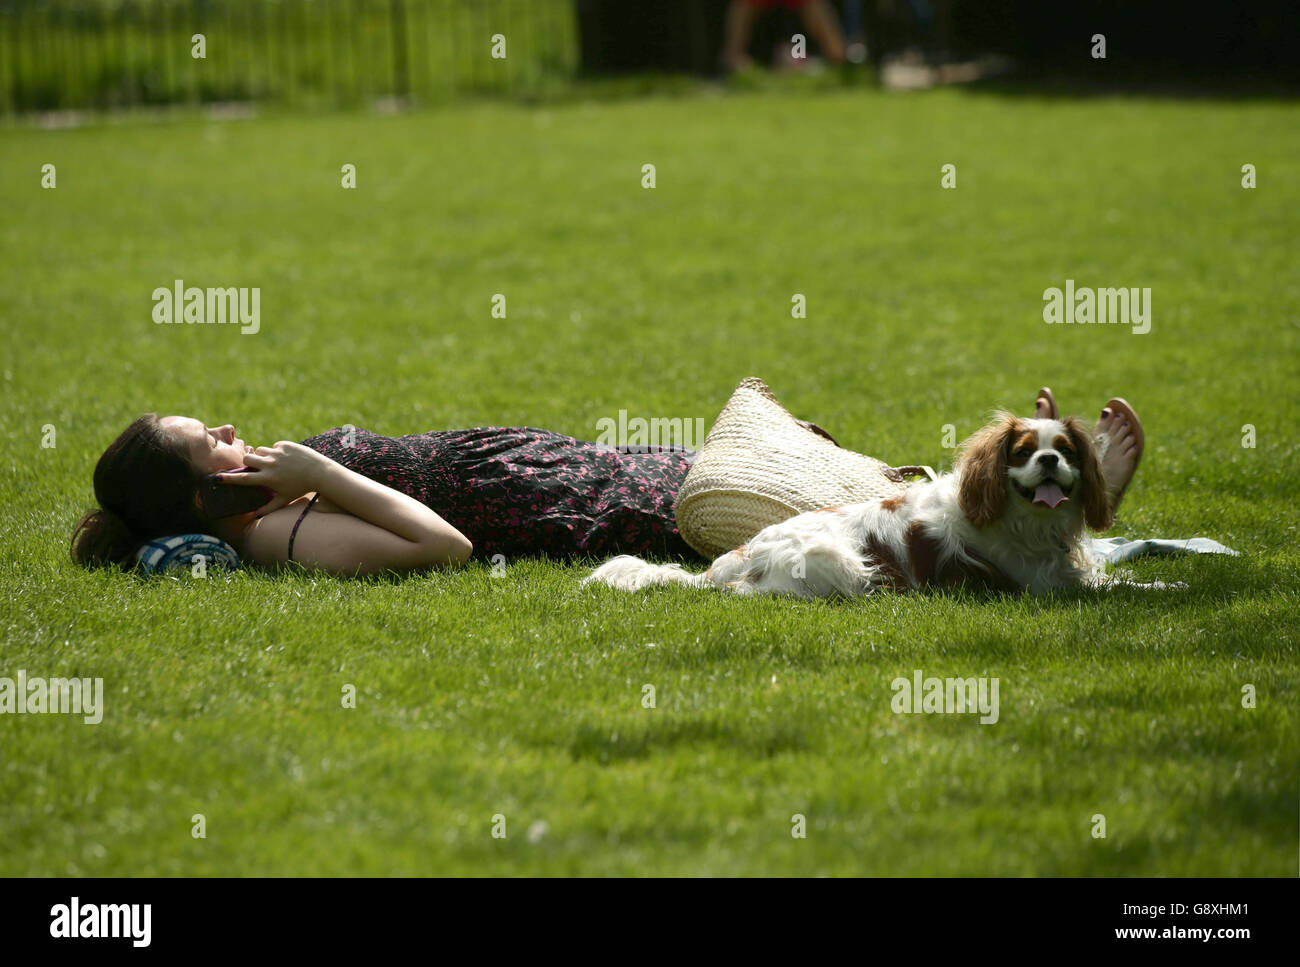 A sunbather and her dog enjoying the hot weather in Hyde Park, London. Stock Photo